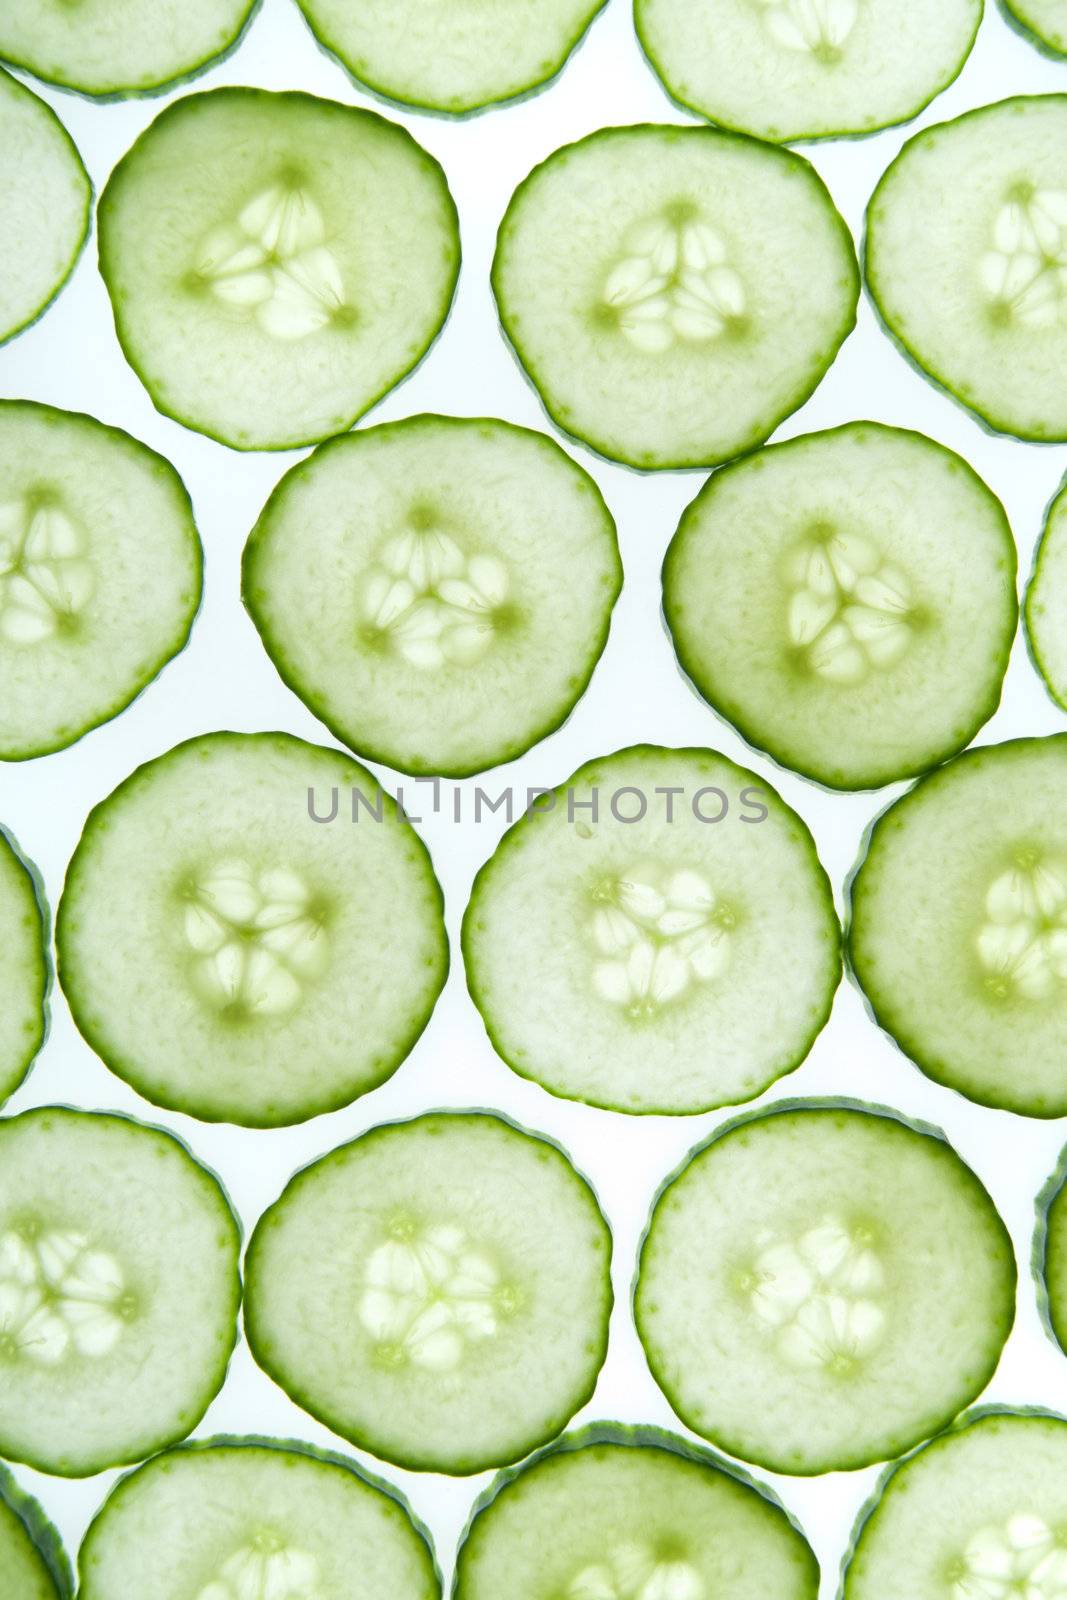 Vegetables and a grid of green slices